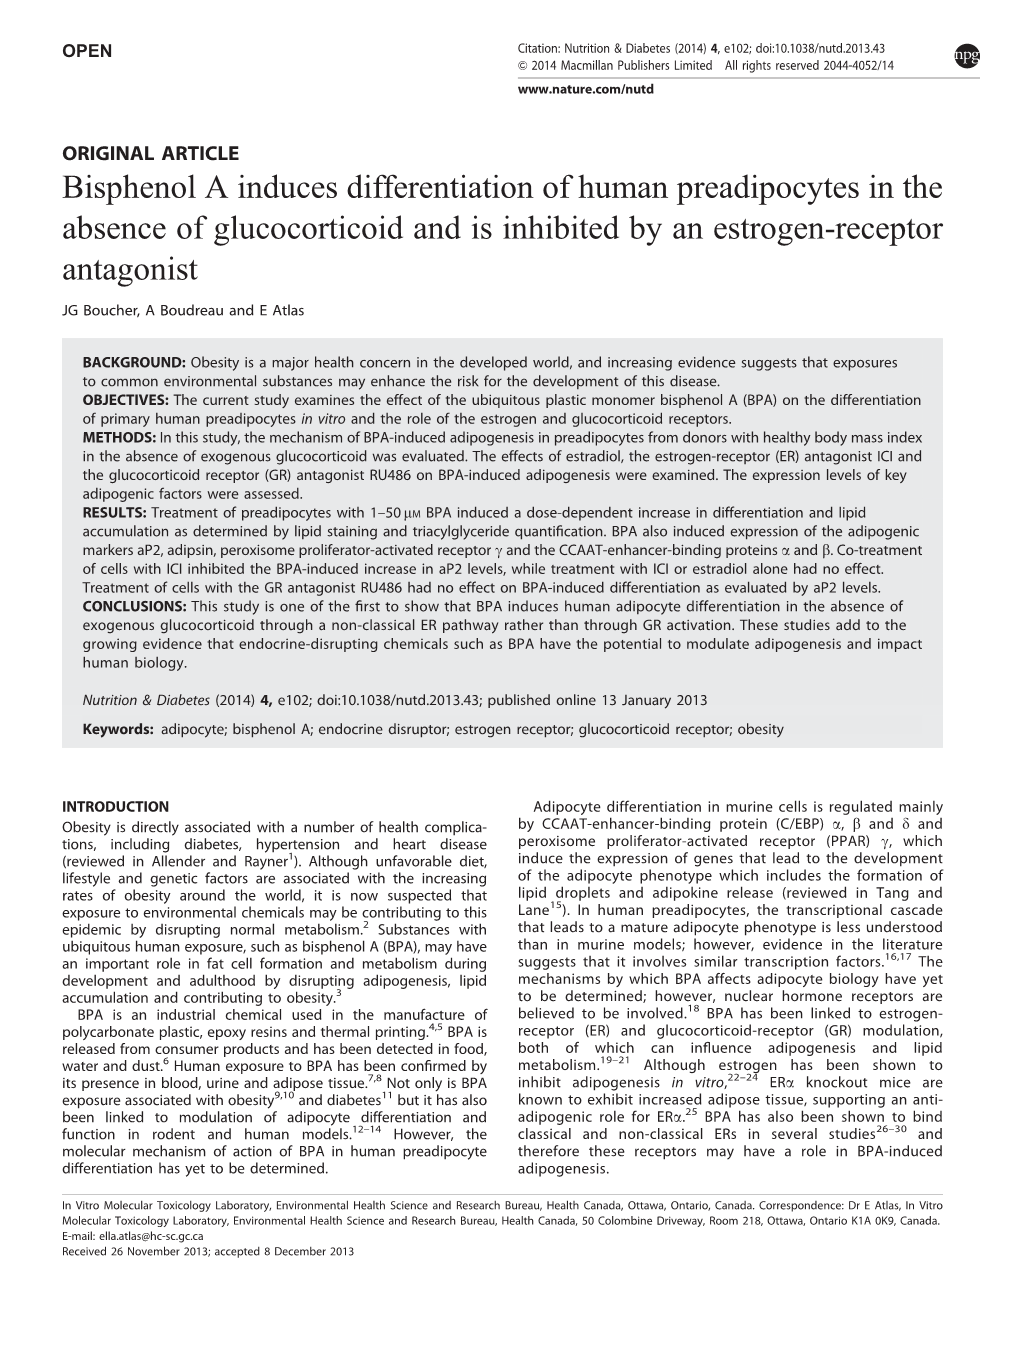 Bisphenol a Induces Differentiation of Human Preadipocytes in the Absence of Glucocorticoid and Is Inhibited by an Estrogen-Receptor Antagonist